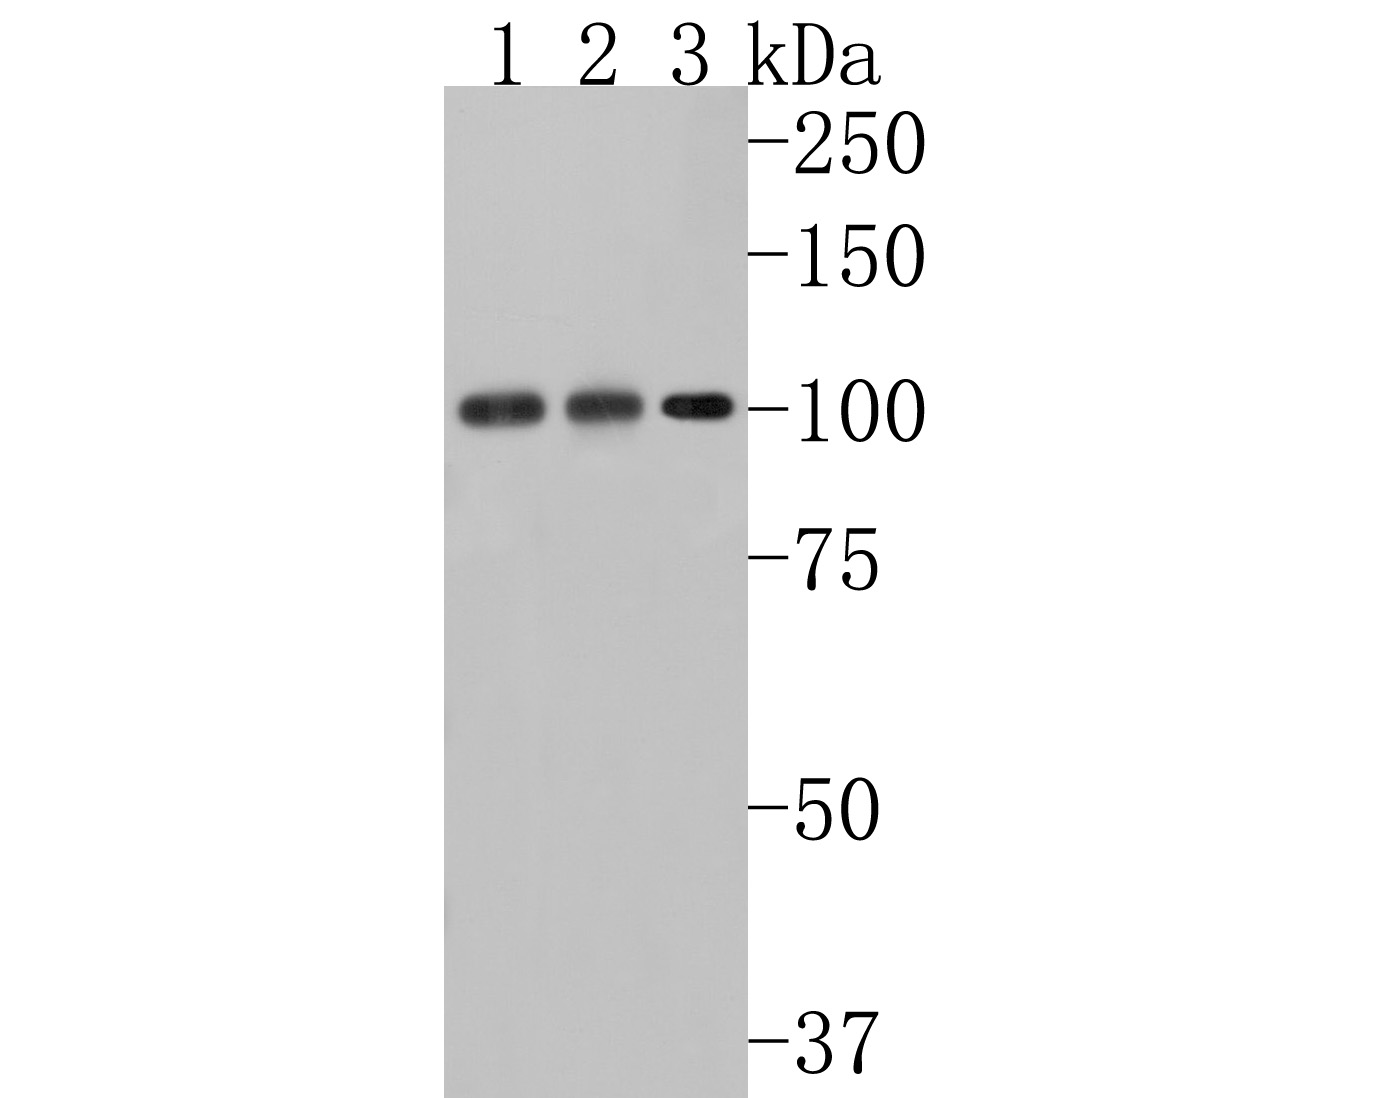 Western blot analysis of Hsp105 on different lysates. Proteins were transferred to a PVDF membrane and blocked with 5% BSA in PBS for 1 hour at room temperature. The primary antibody (ET1612-88, 1/500) was used in 5% BSA at room temperature for 2 hours. Goat Anti-Rabbit IgG - HRP Secondary Antibody (HA1001) at 1:200,000 dilution was used for 1 hour at room temperature.<br />
Positive control: <br />
Lane 1: MCF-7 cell lysate<br />
Lane 2: Hela cell lysate<br />
Lane 3: Daudi cell lysate